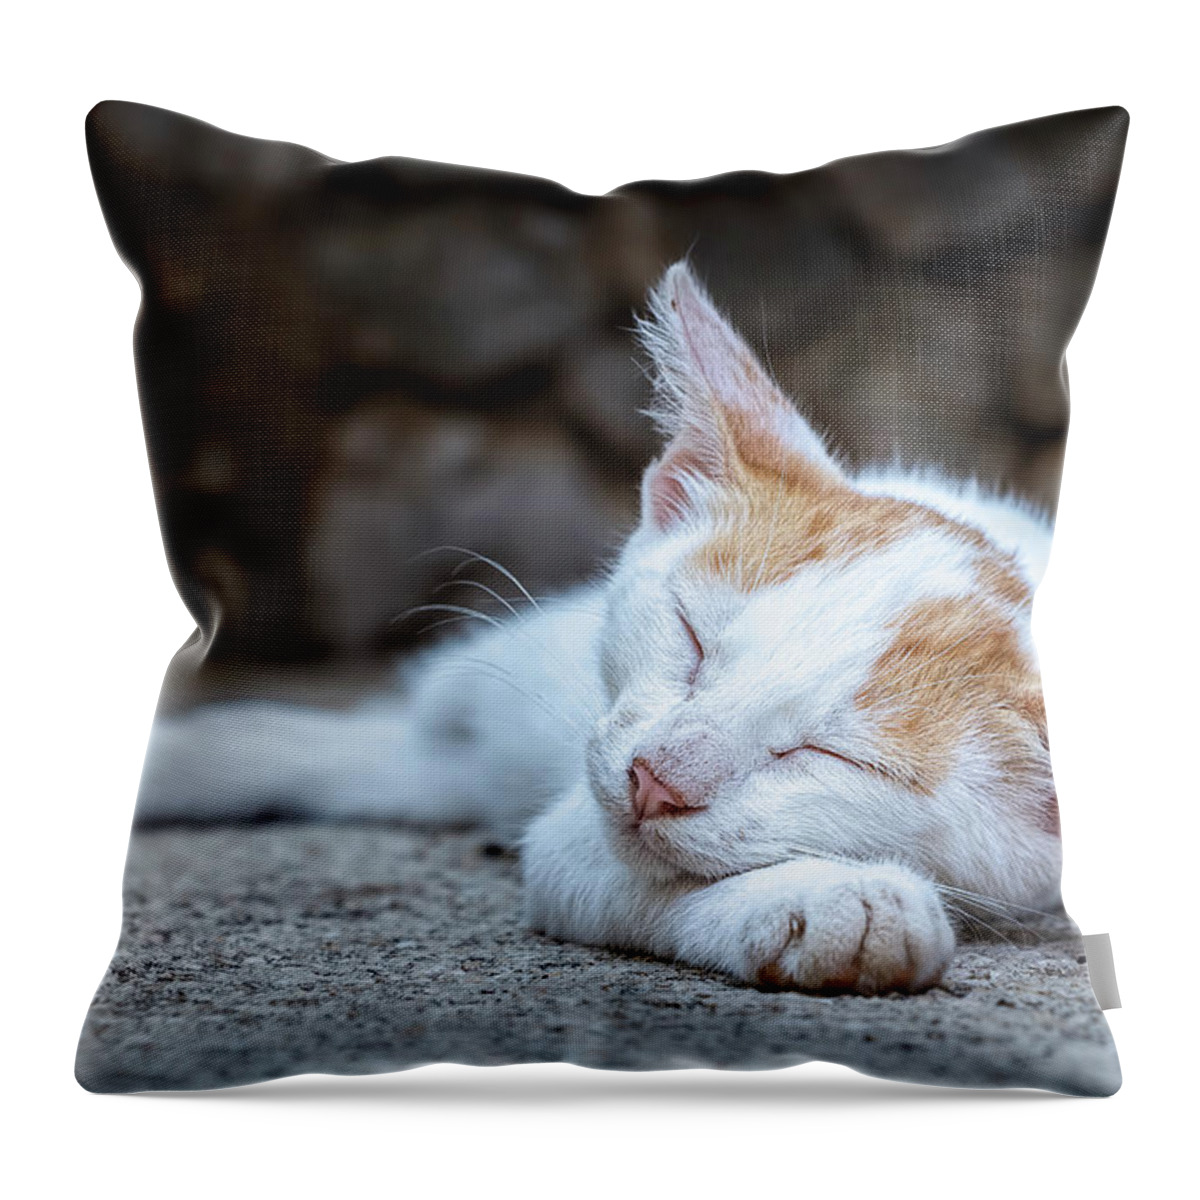 Animal Throw Pillow featuring the photograph Sleeping Kitty by Rick Deacon